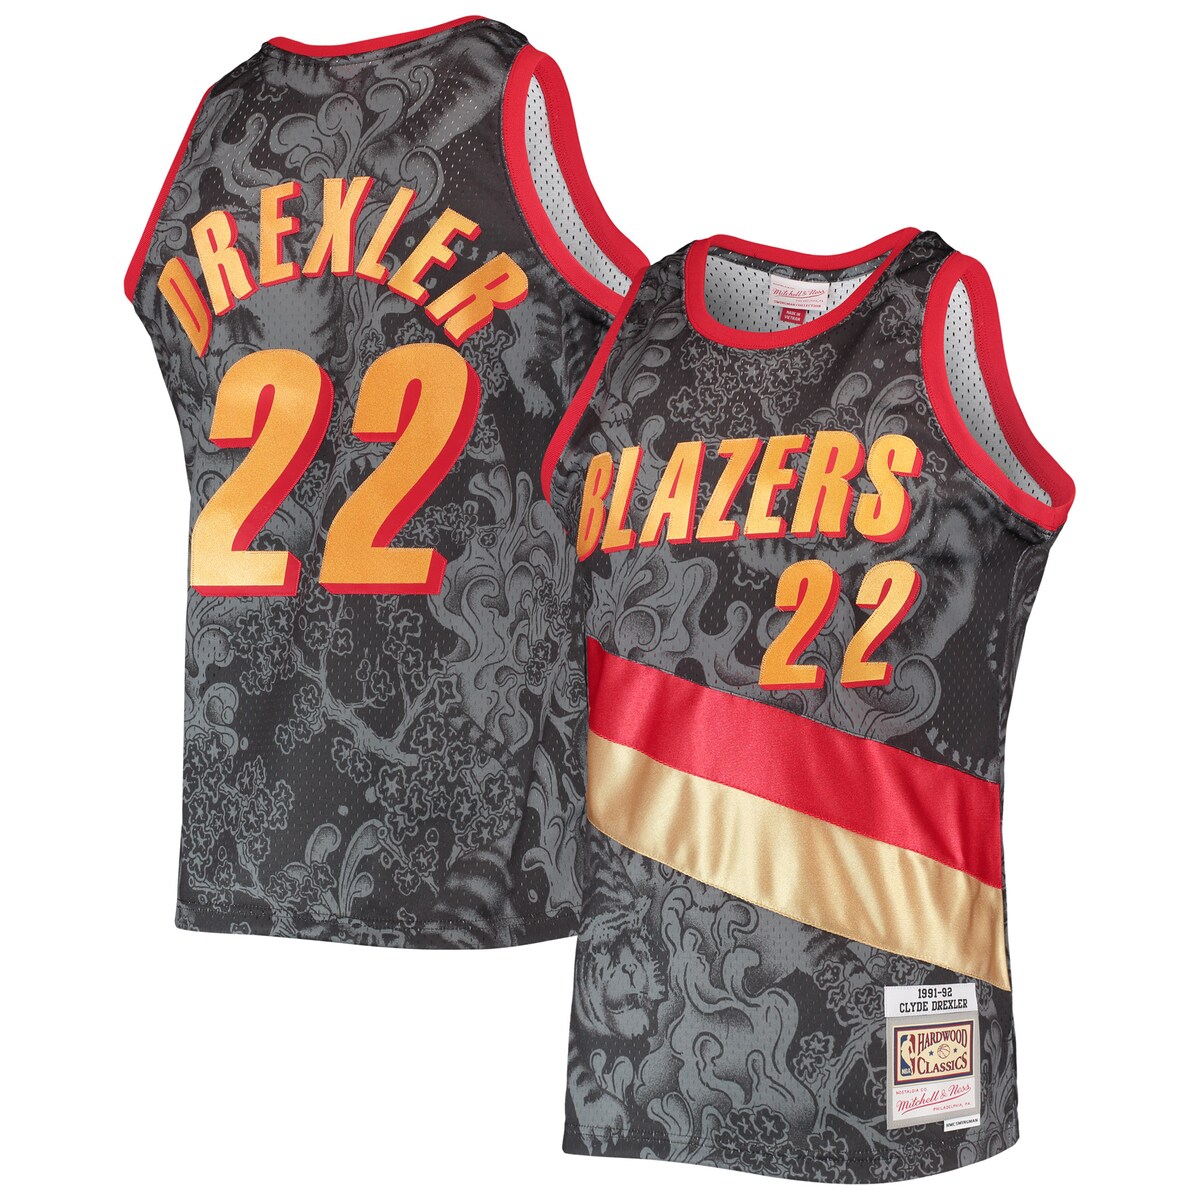 Mitchell & Ness' Hardwood Classics line lets you celebrate a new year with a little nostalgia thanks to this 1991/92 Clyde Drexler Portland Trail Blazers Lunar New Year Swingman jersey. It features a unique design with tackle twill graphics over mesh fabric. This one-of-a-kind jersey is a great way to pay homage to Clyde Drexler with a cultural touch.Woven jock tag at hemOfficially licensedBrand: Mitchell & NessMachine wash, line drySleevelessMaterial: 100% PolyesterMesh fabricImportedCrew neckSide splits at hemTackle twill graphicsSwingmanSublimated graphics